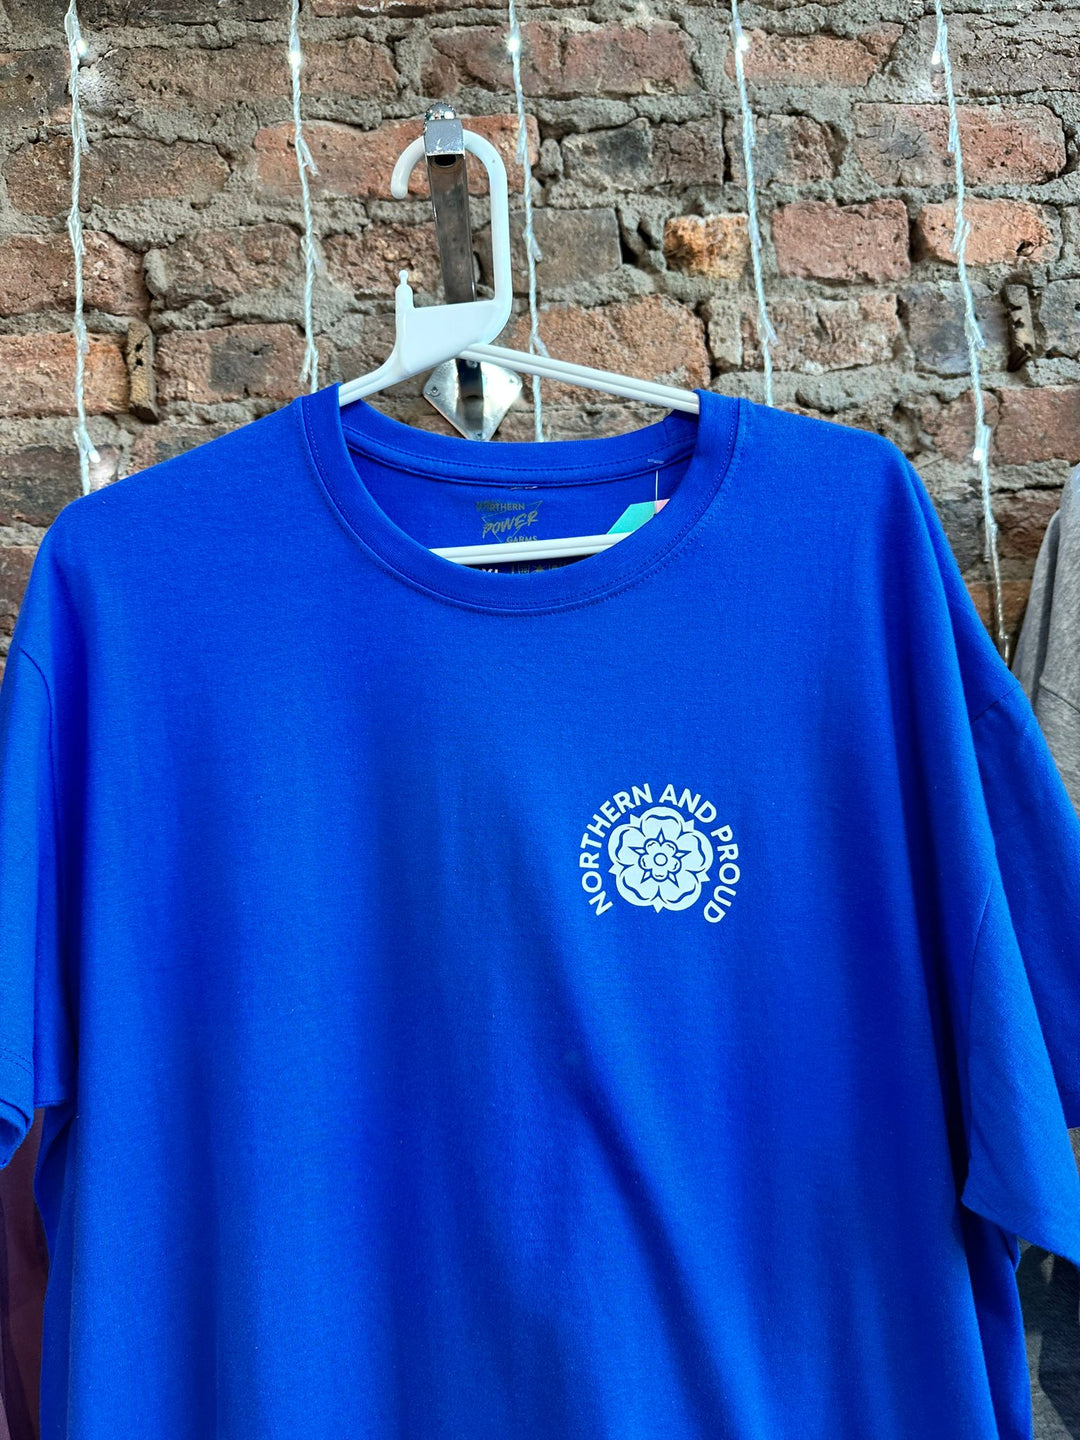 *Northern and Proud Blue Tee - 2XL and 4XL